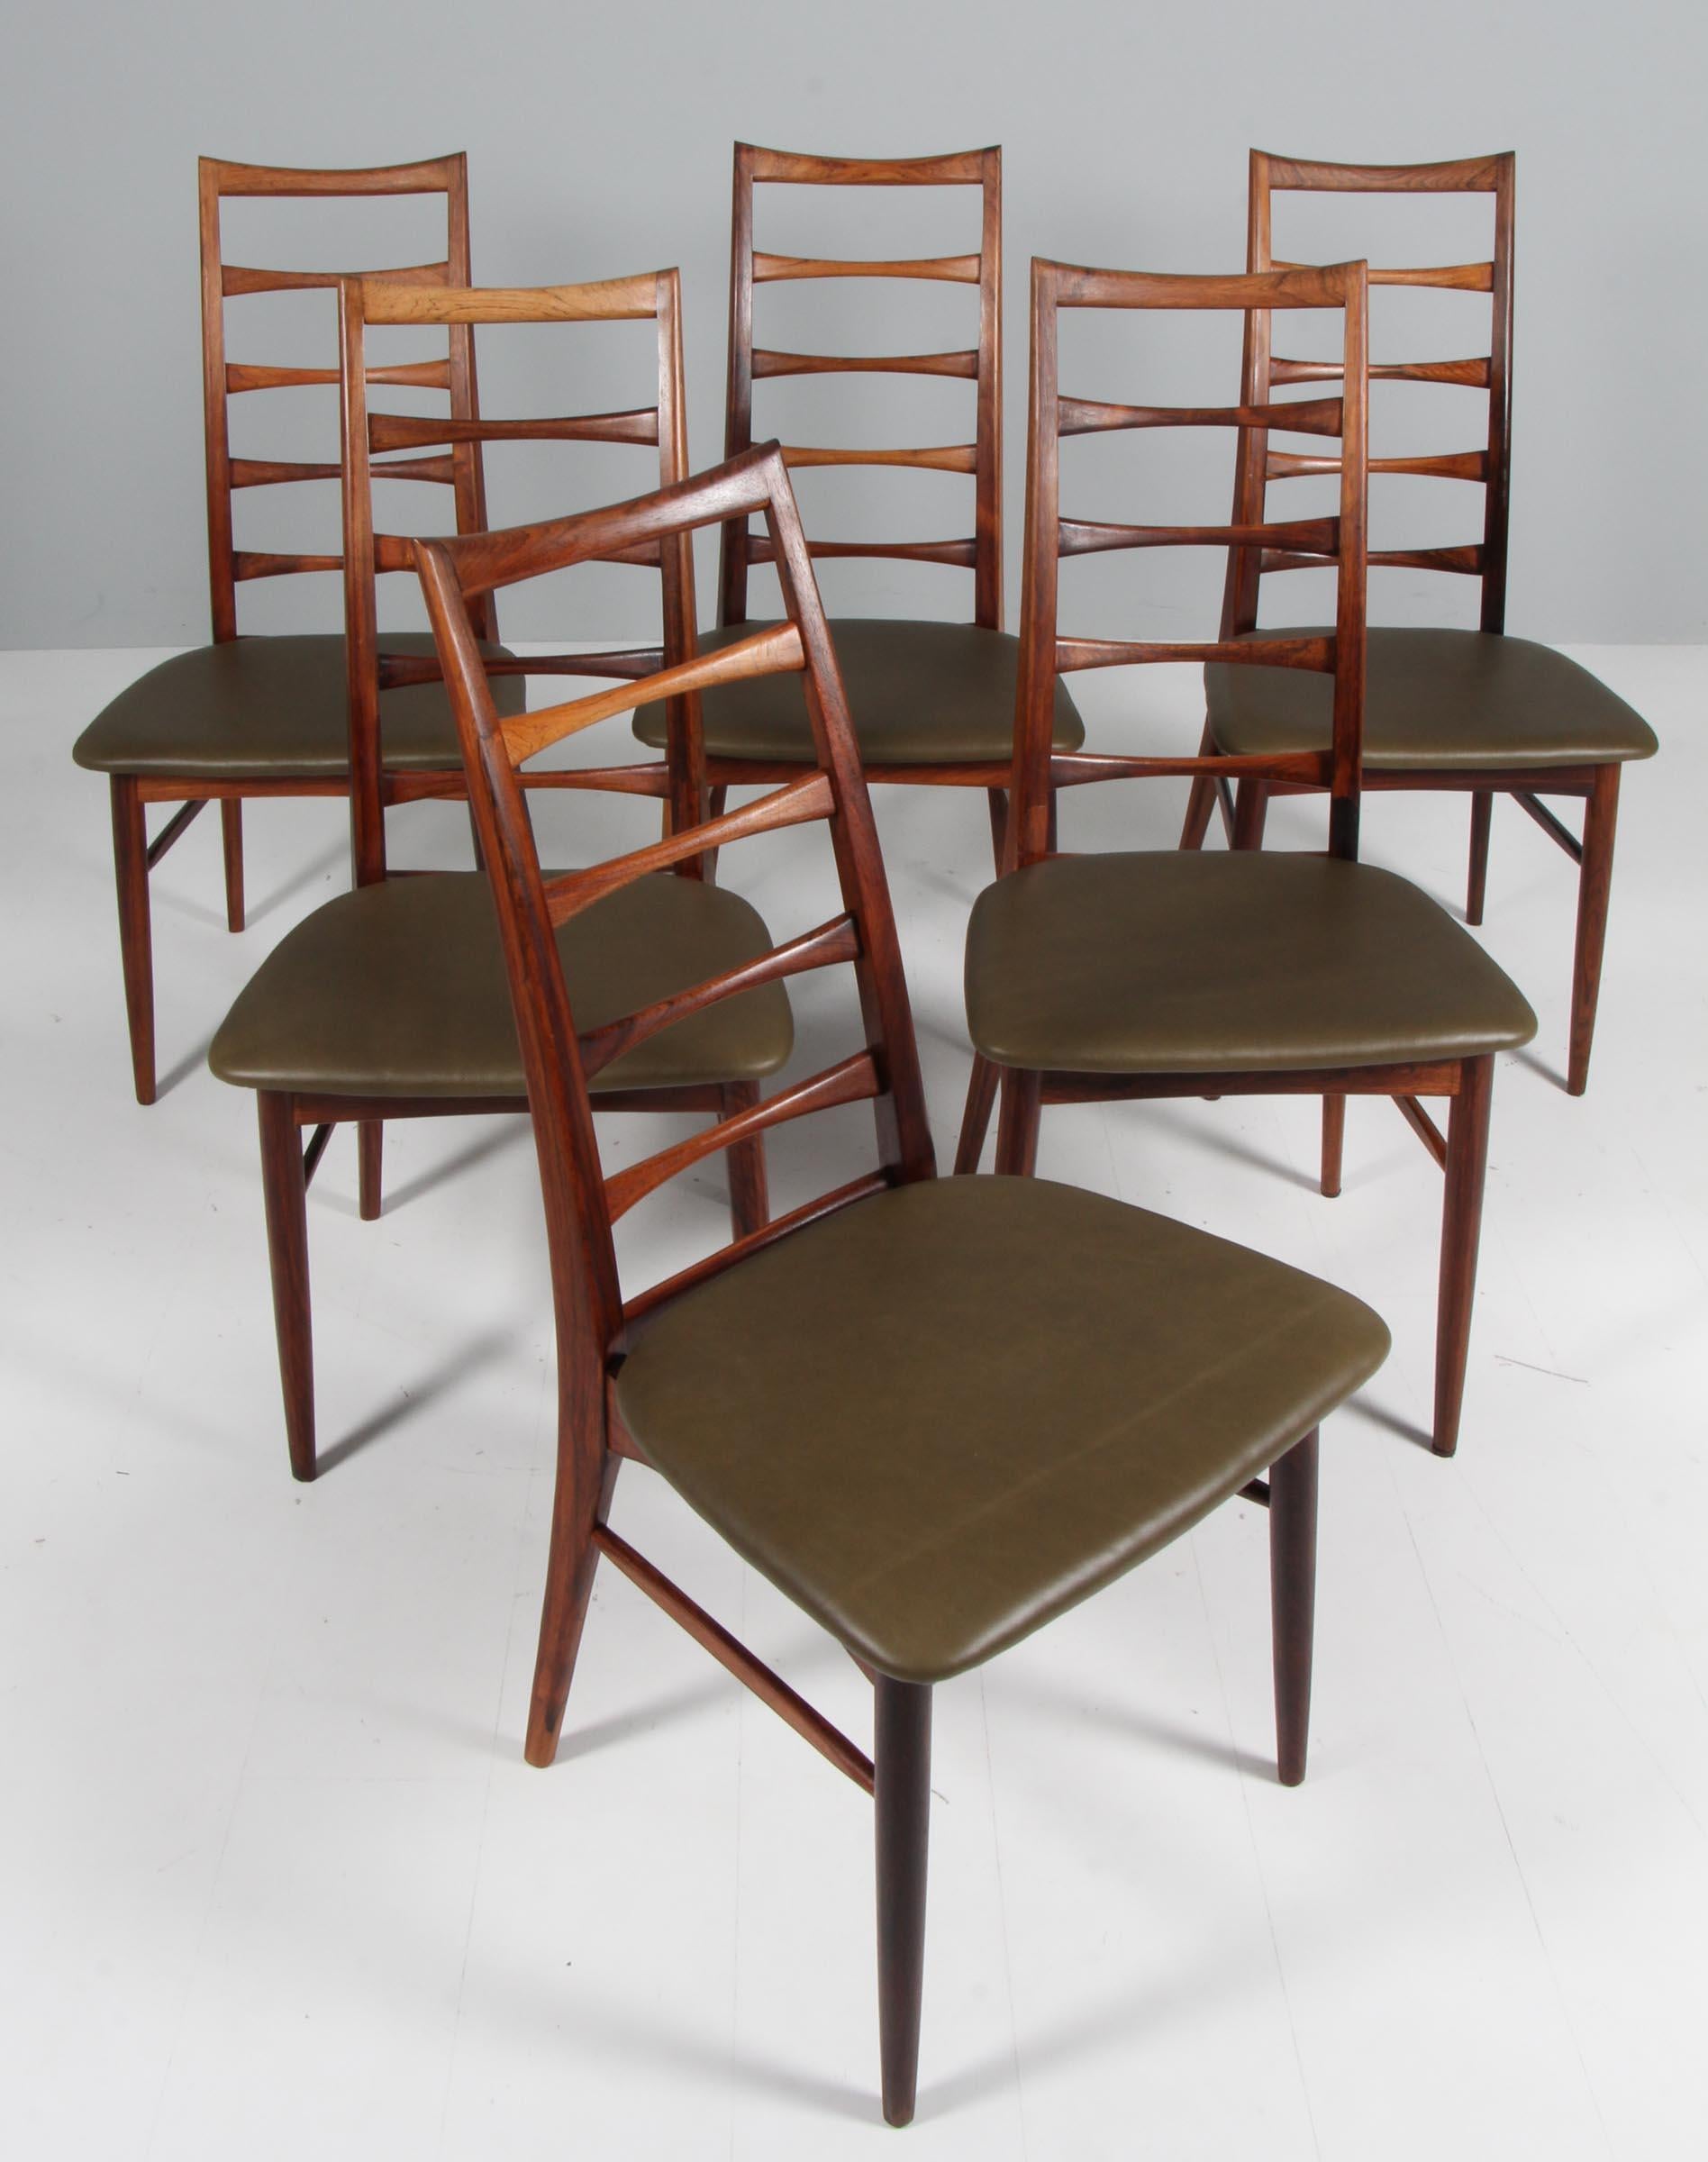 Set of Niels Koefoed dining chairs made in rosewood

New upholstered with green Envy leather from Arne Sørensen.

Model Lis, made by Niels Koefoeds Møbelfabrik Hornslet, 1960s.

